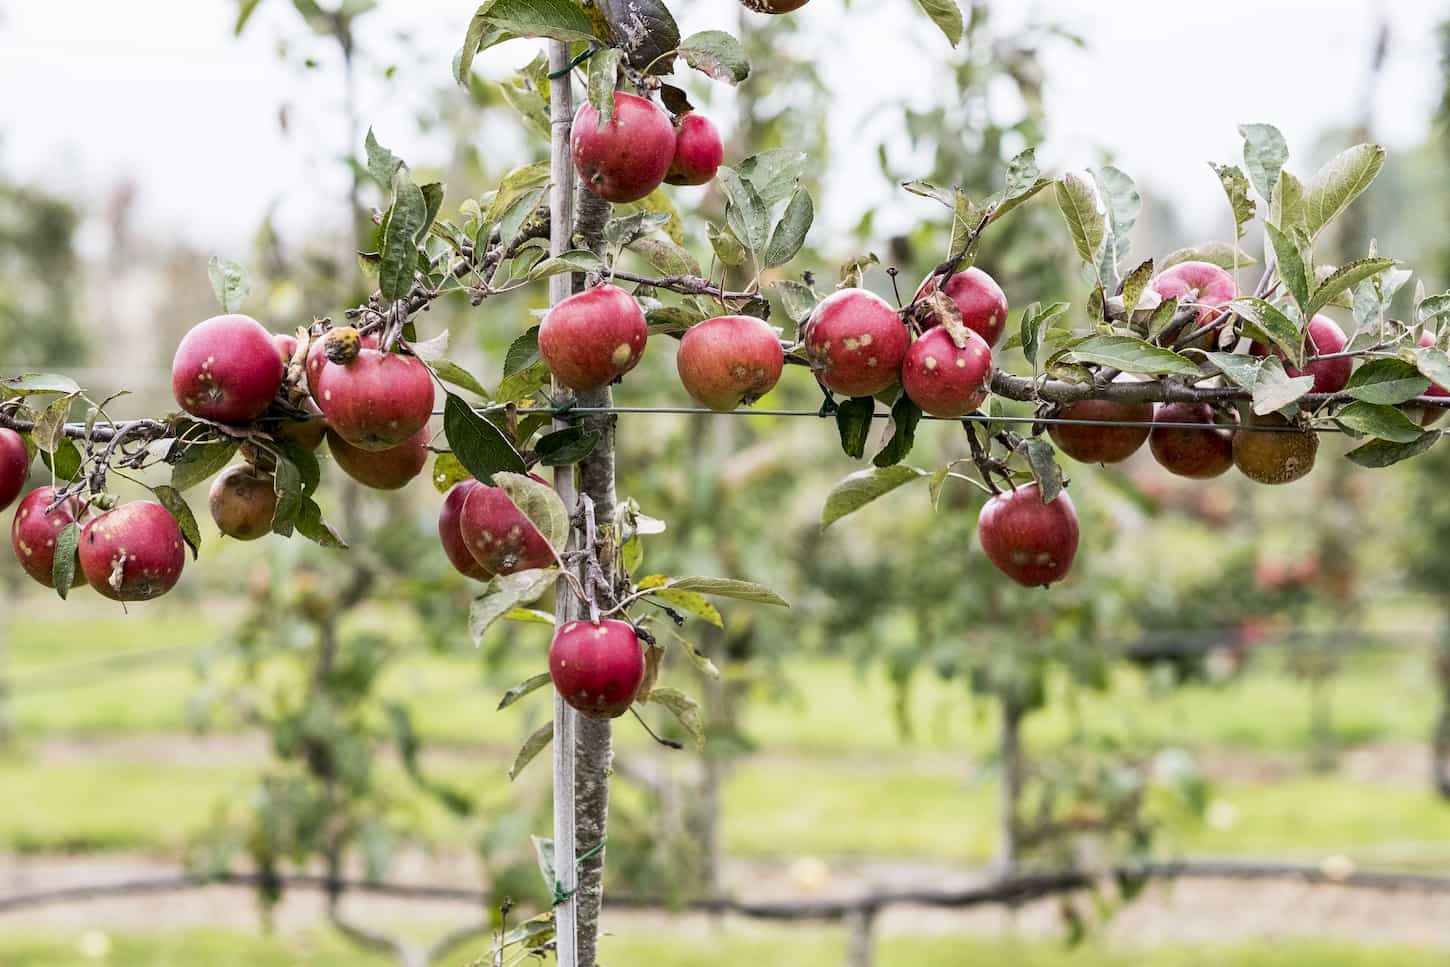 Can You Prune Fruit Trees in Summer or in the Fall?